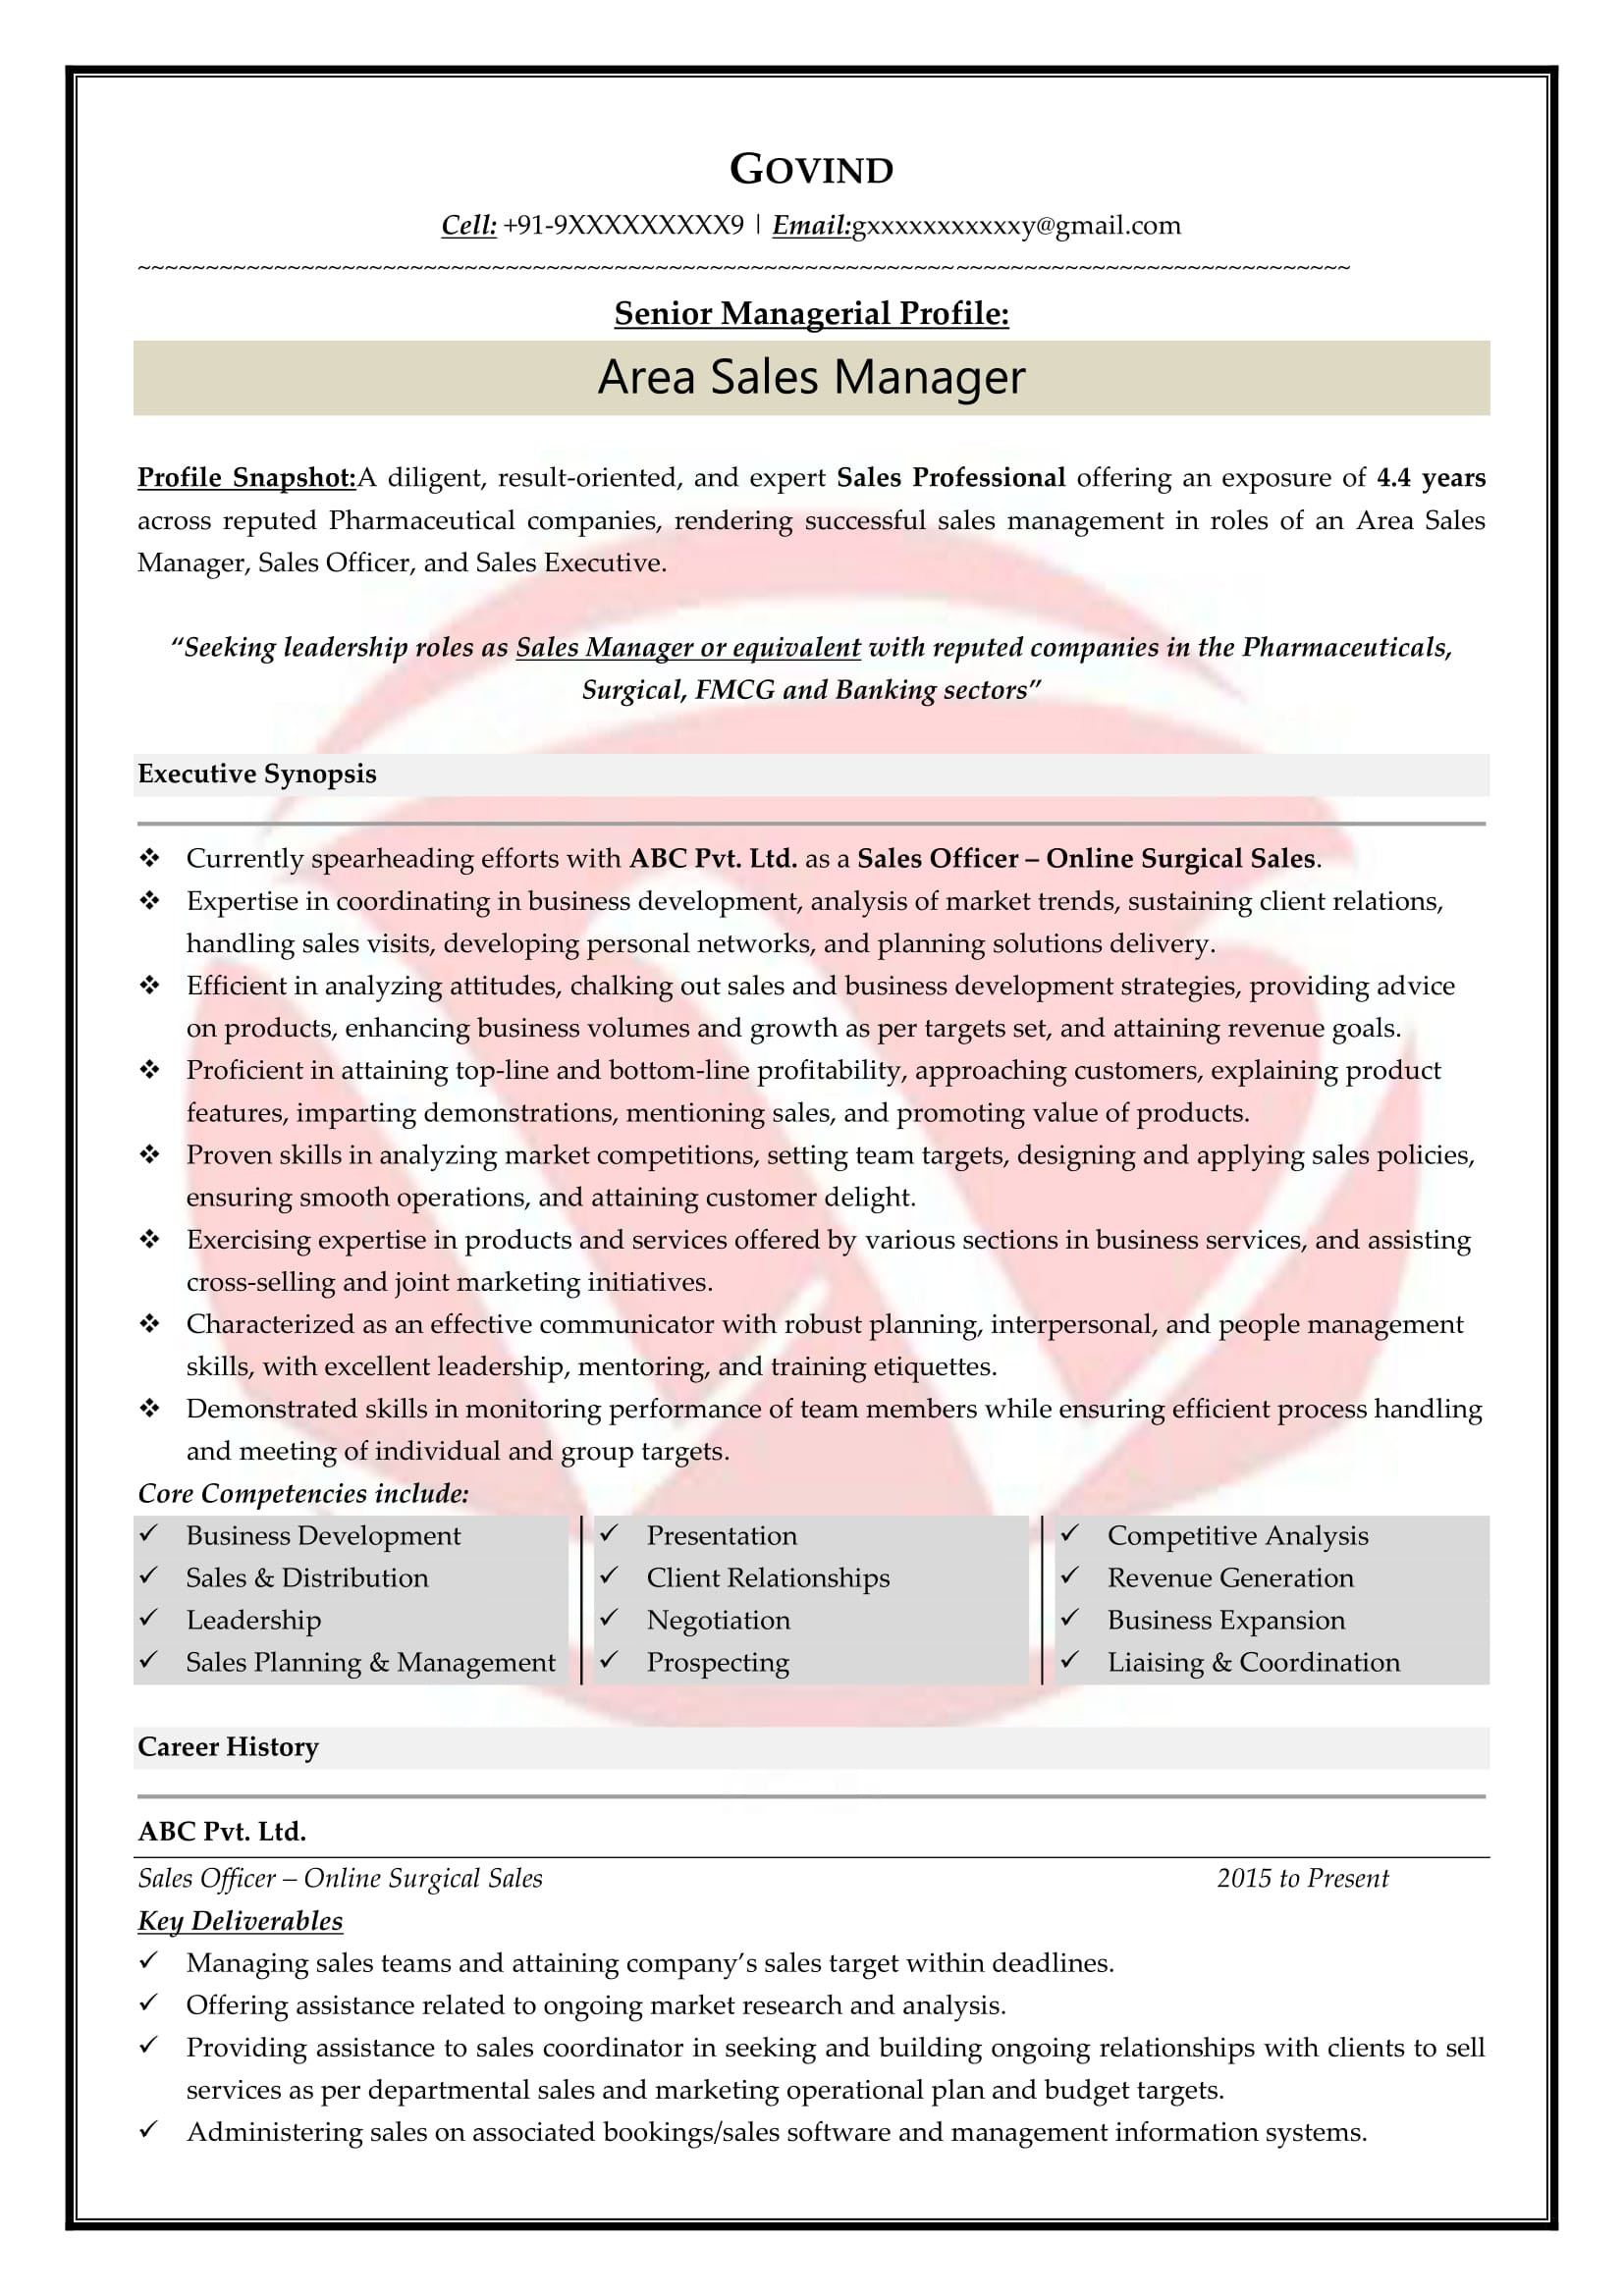 Sample Resume for Mutual Fund Sales Sales Sample Resumes, Download Resume format Templates!